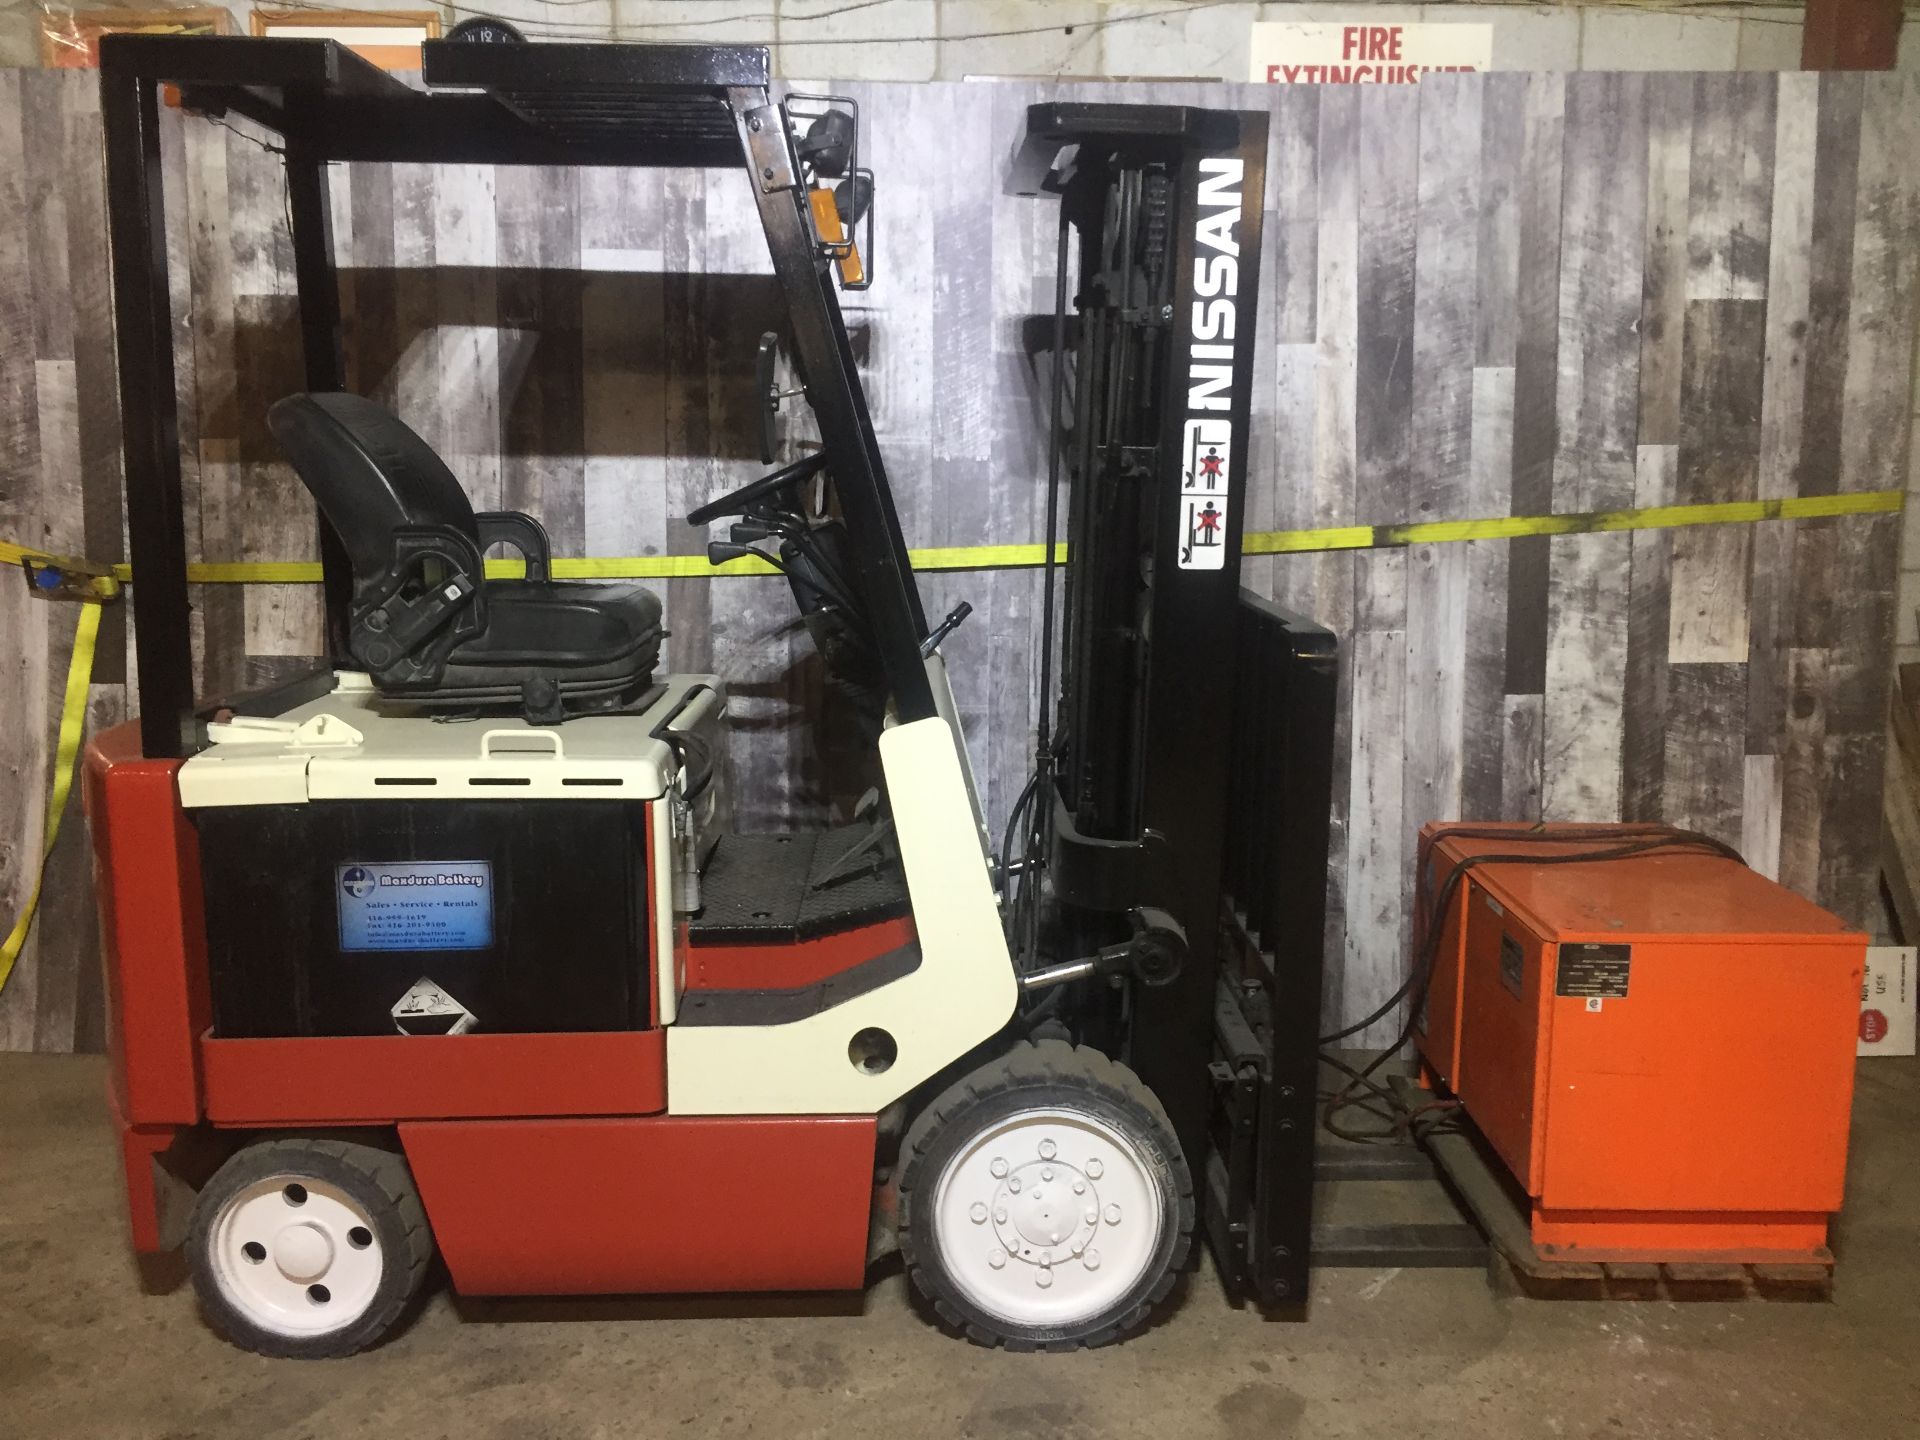 NISSAN (MODEL #CWPO2L25S) 4,000LBS ELECTRIC 4 STAGE FORKLIFT - SERIAL #LPI958001 INCLUDING